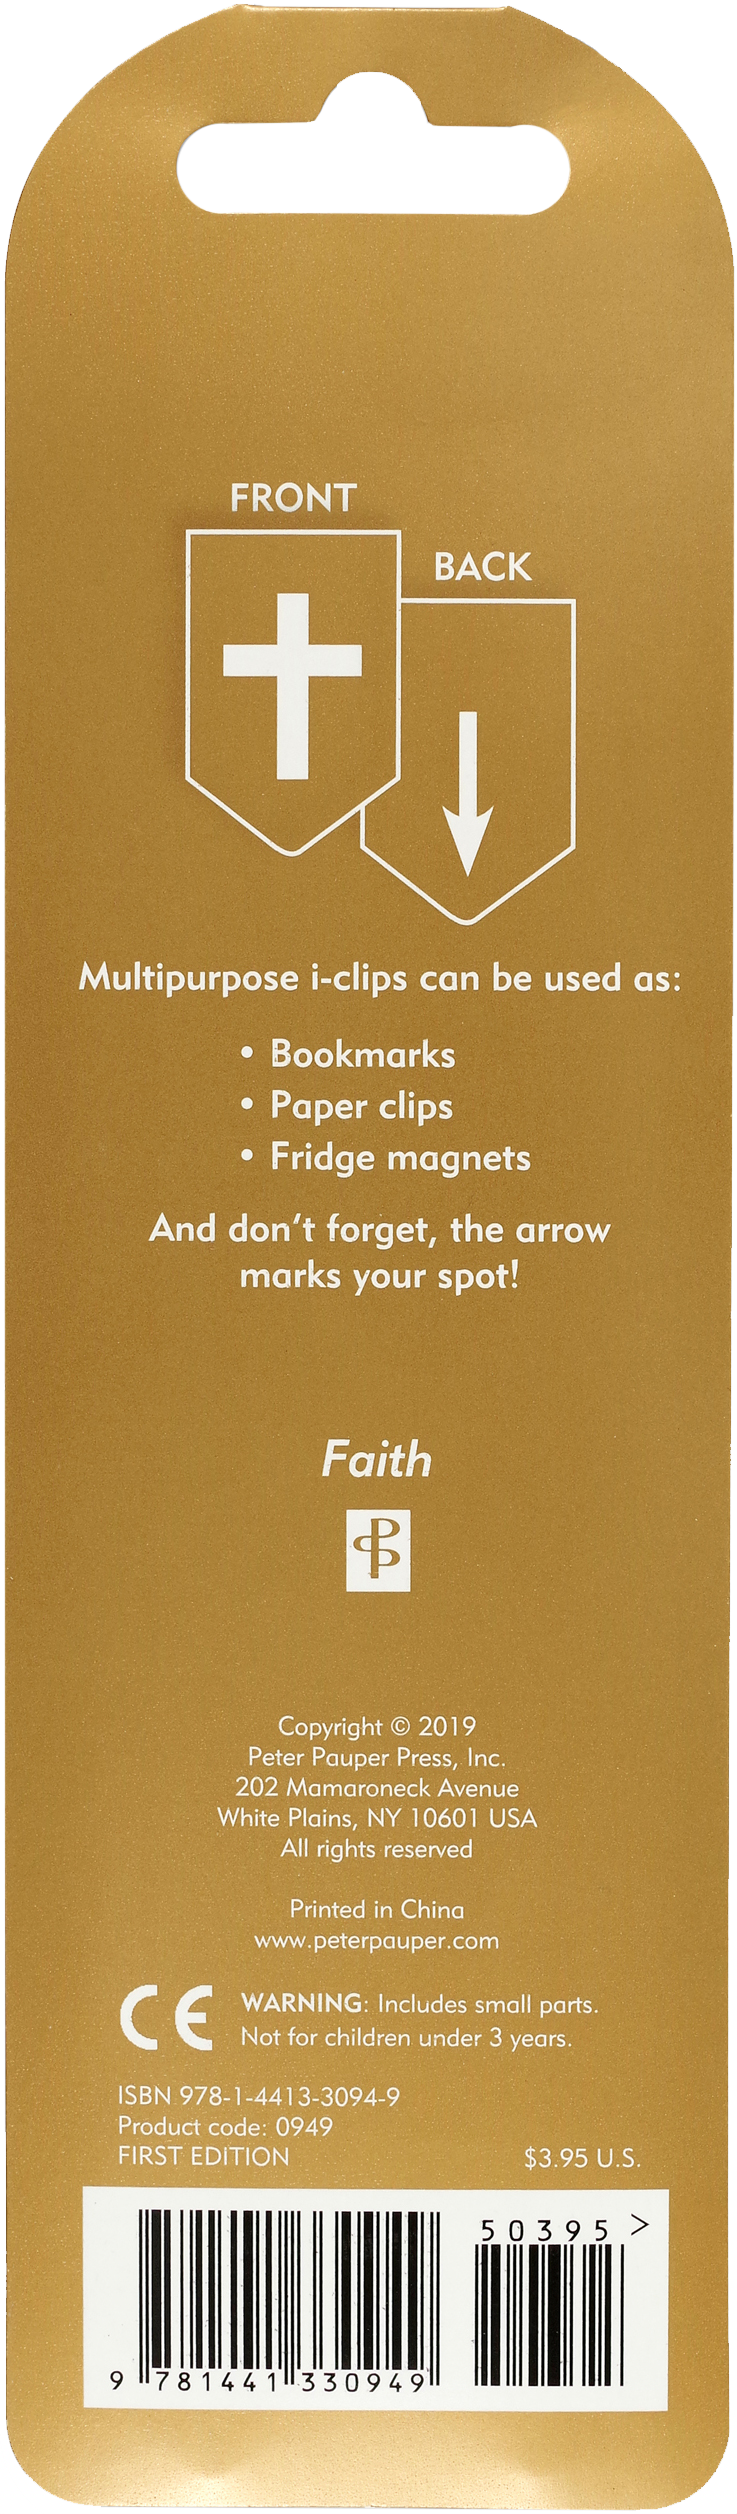 Faith i-clips Magnetic Page Markers  